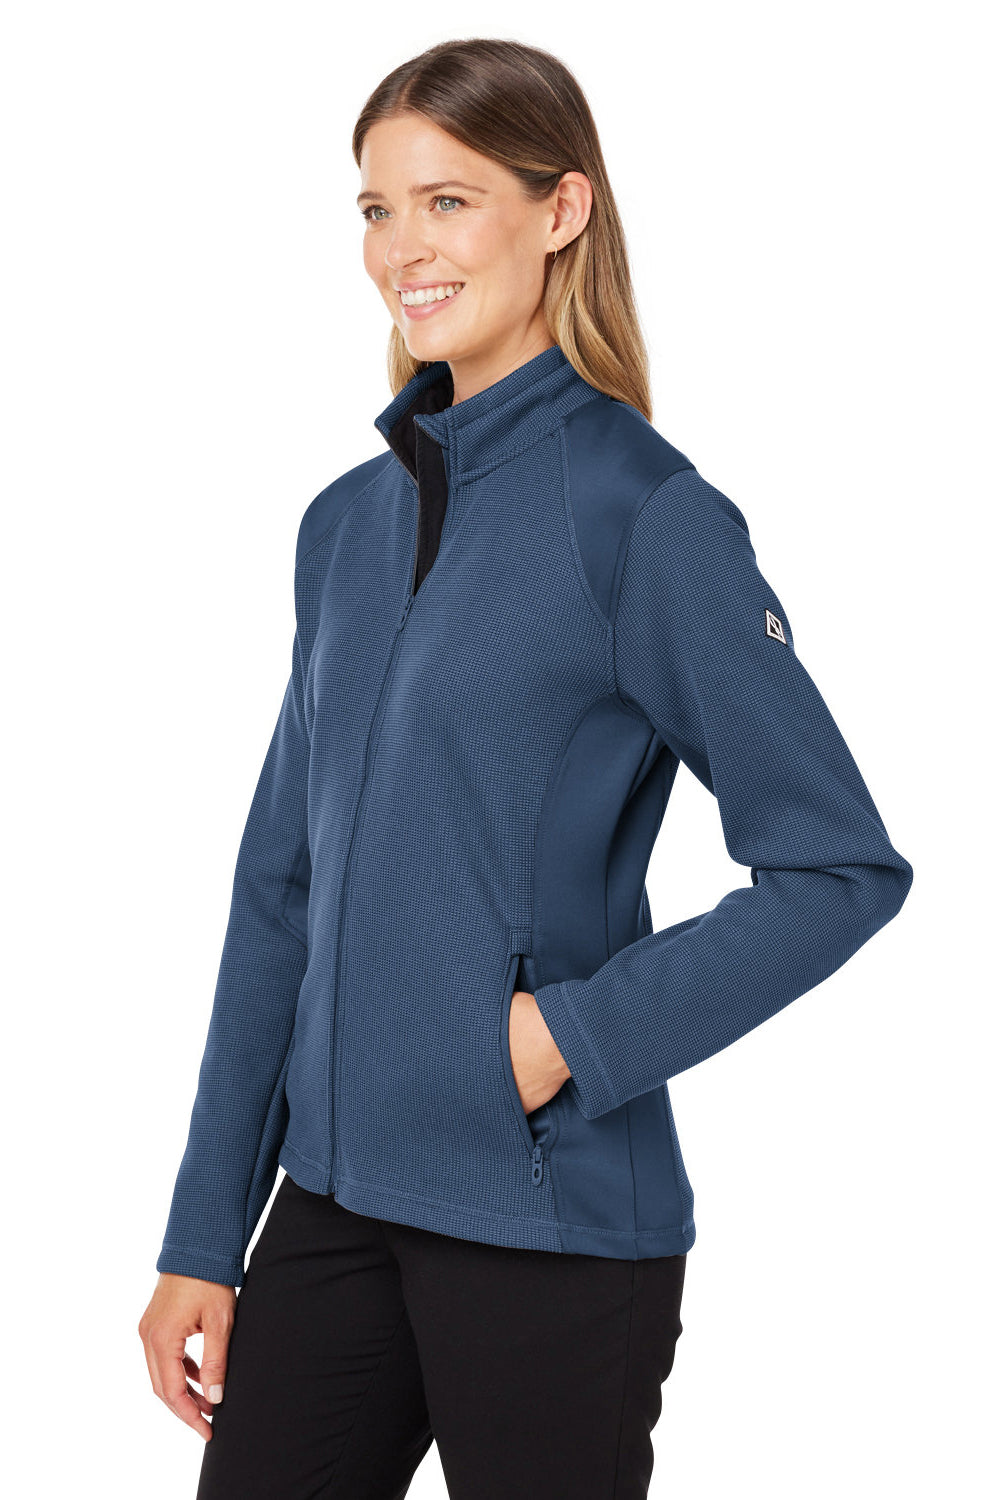 Spyder S17937 Womens Constant Canyon Full Zip Sweater Jacket Frontier Blue 3Q